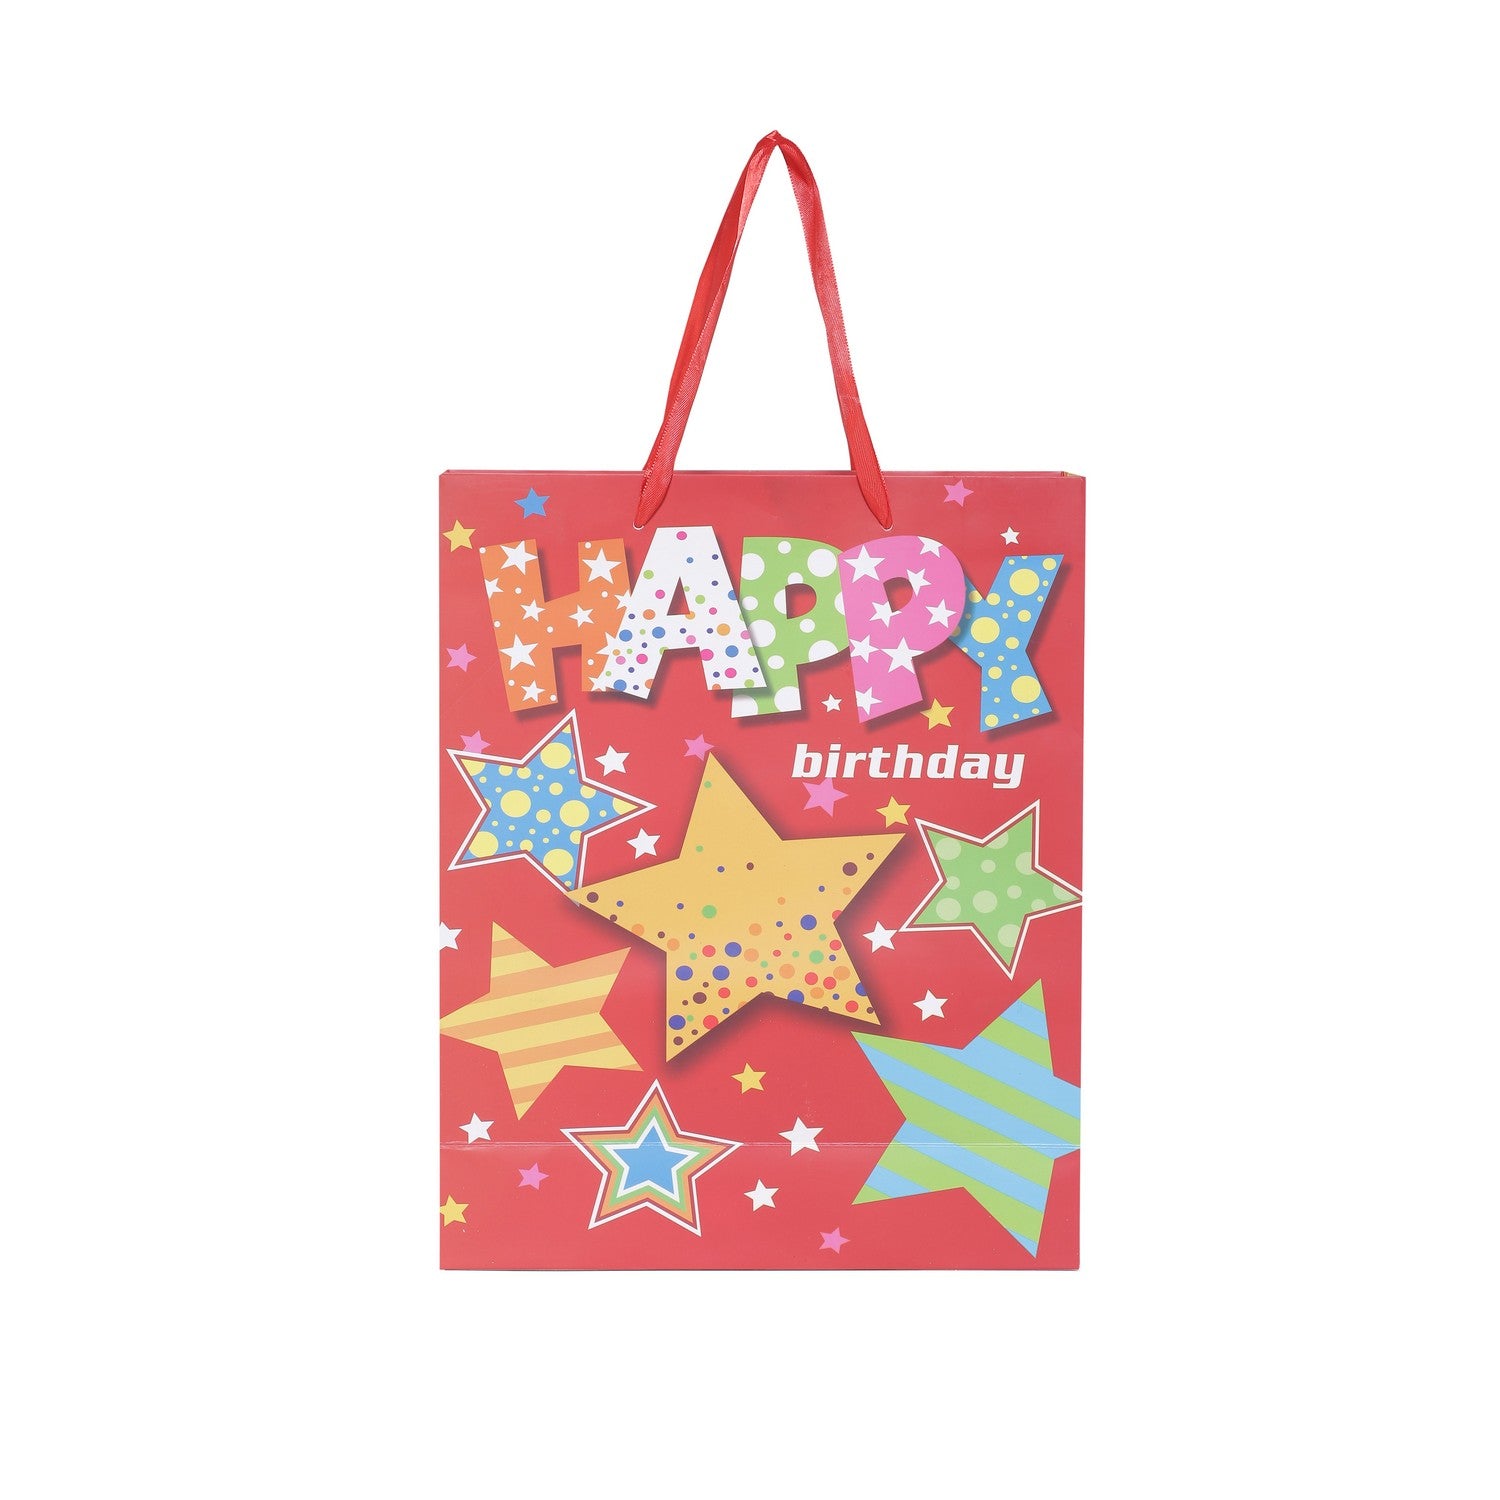 SHUBAN Birthday with starts Paper Bag for Gifting, Birthday Presents (32 X 26 X 10 CM ) - Set of 5 | Book Bargain Buy